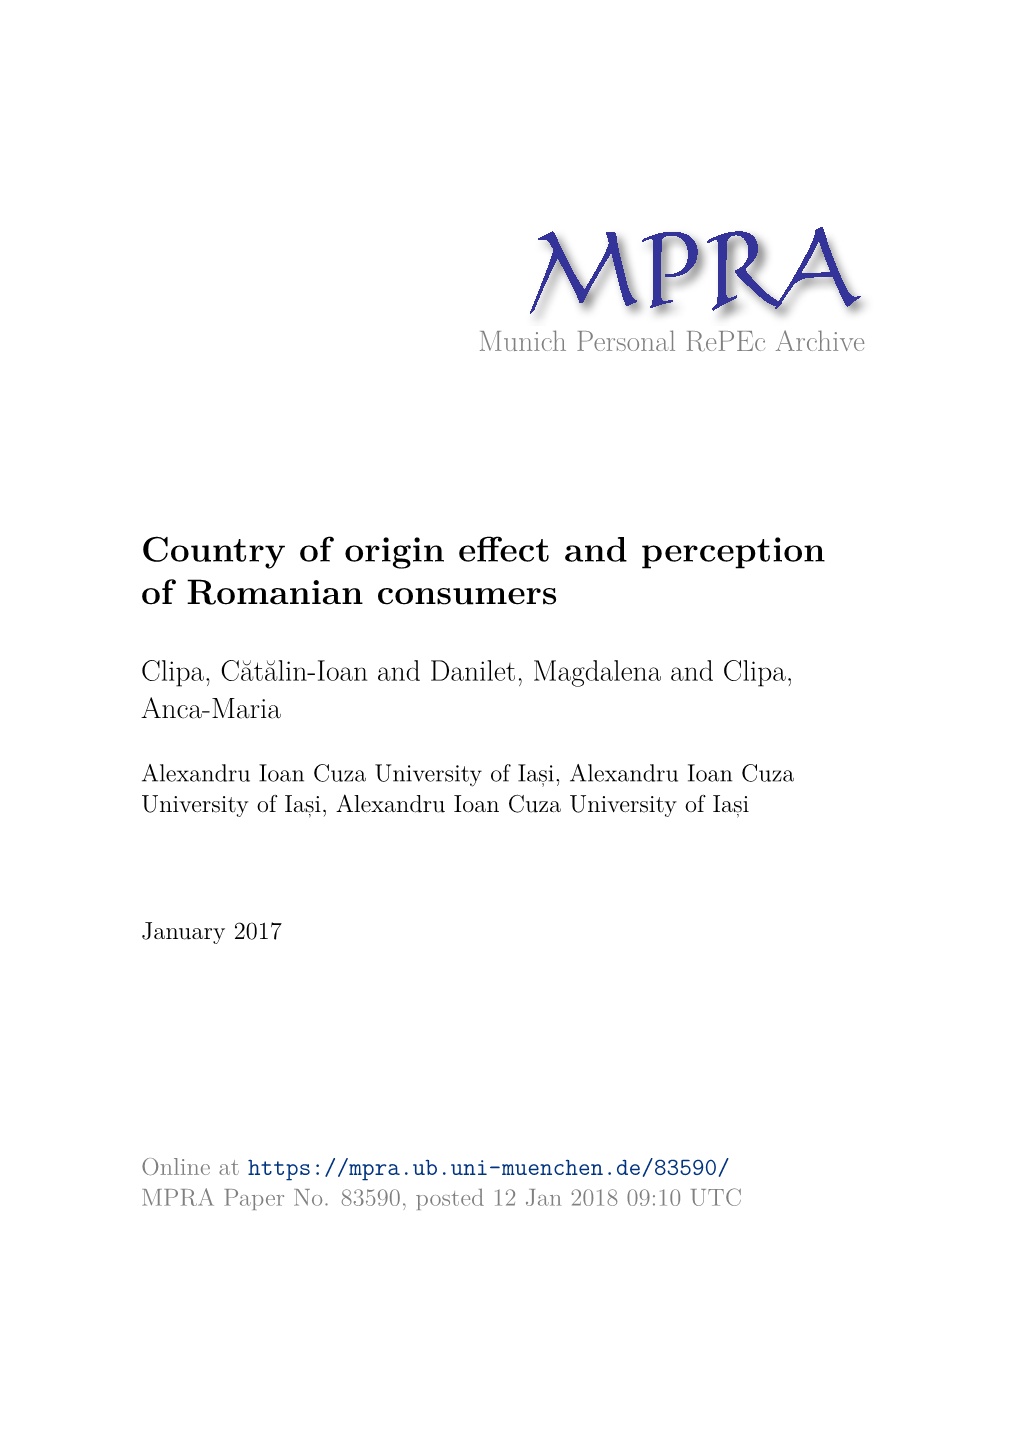 Country of Origin Effect and Perception of Romanian Consumers